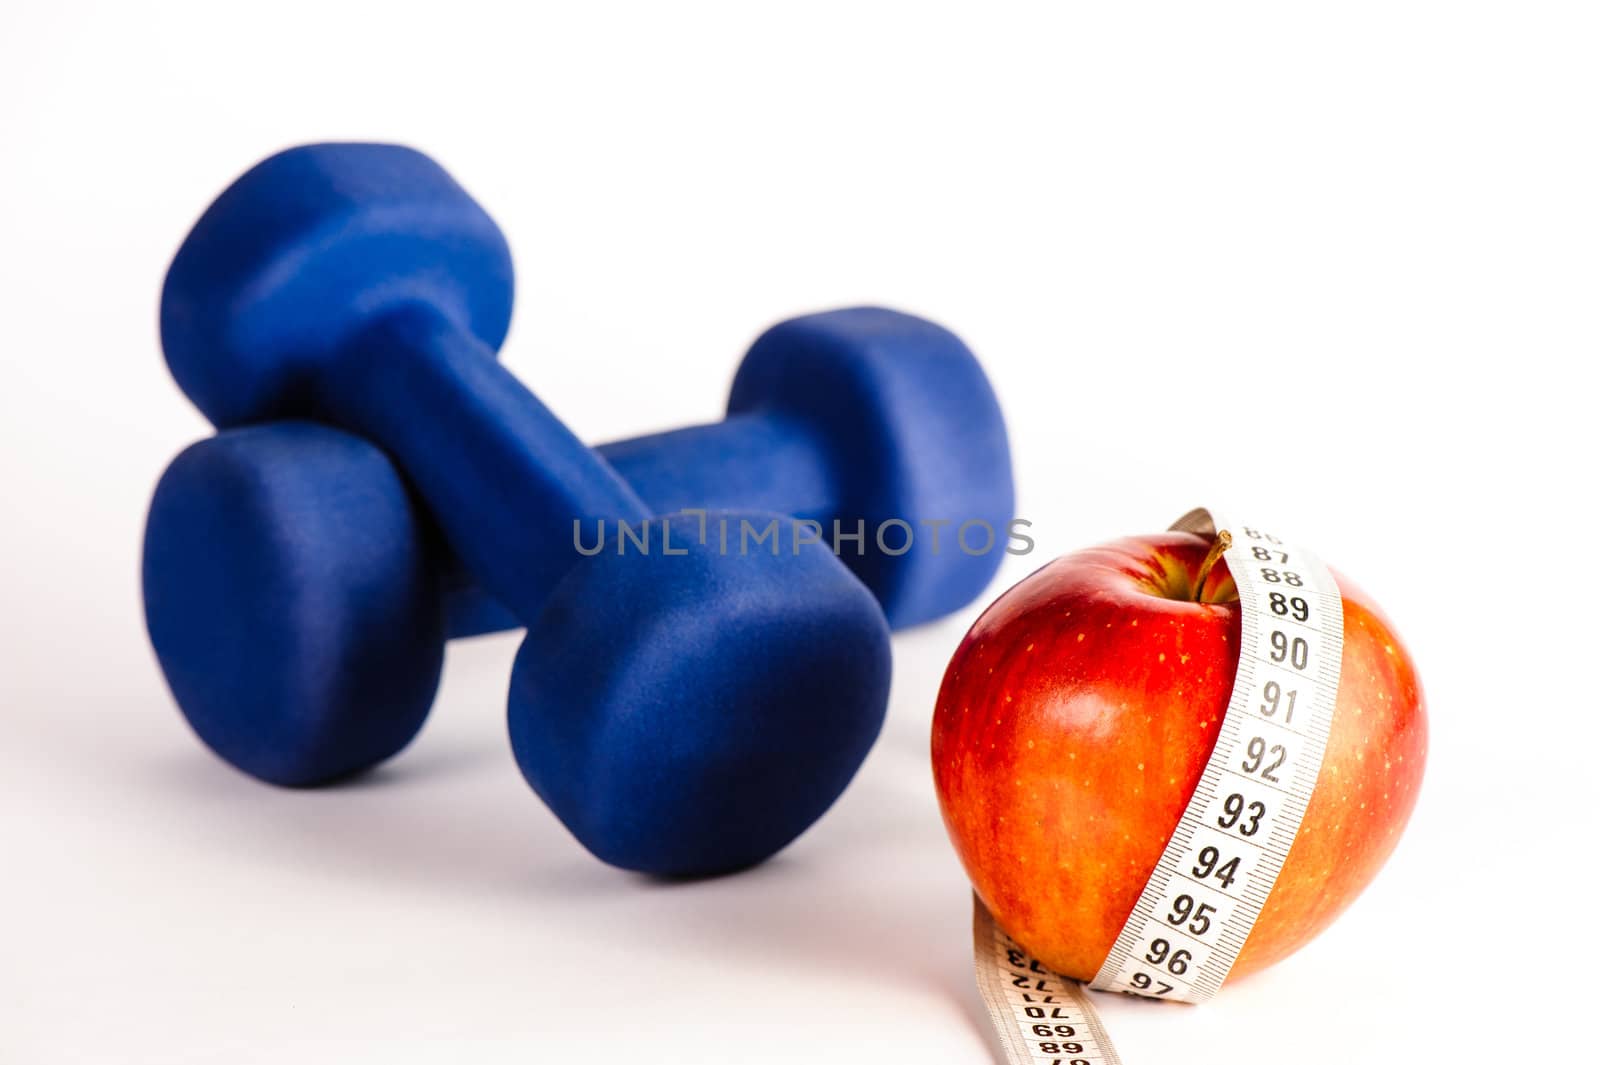 Blue dumbbells and red apple with measure tape isolated on a white background